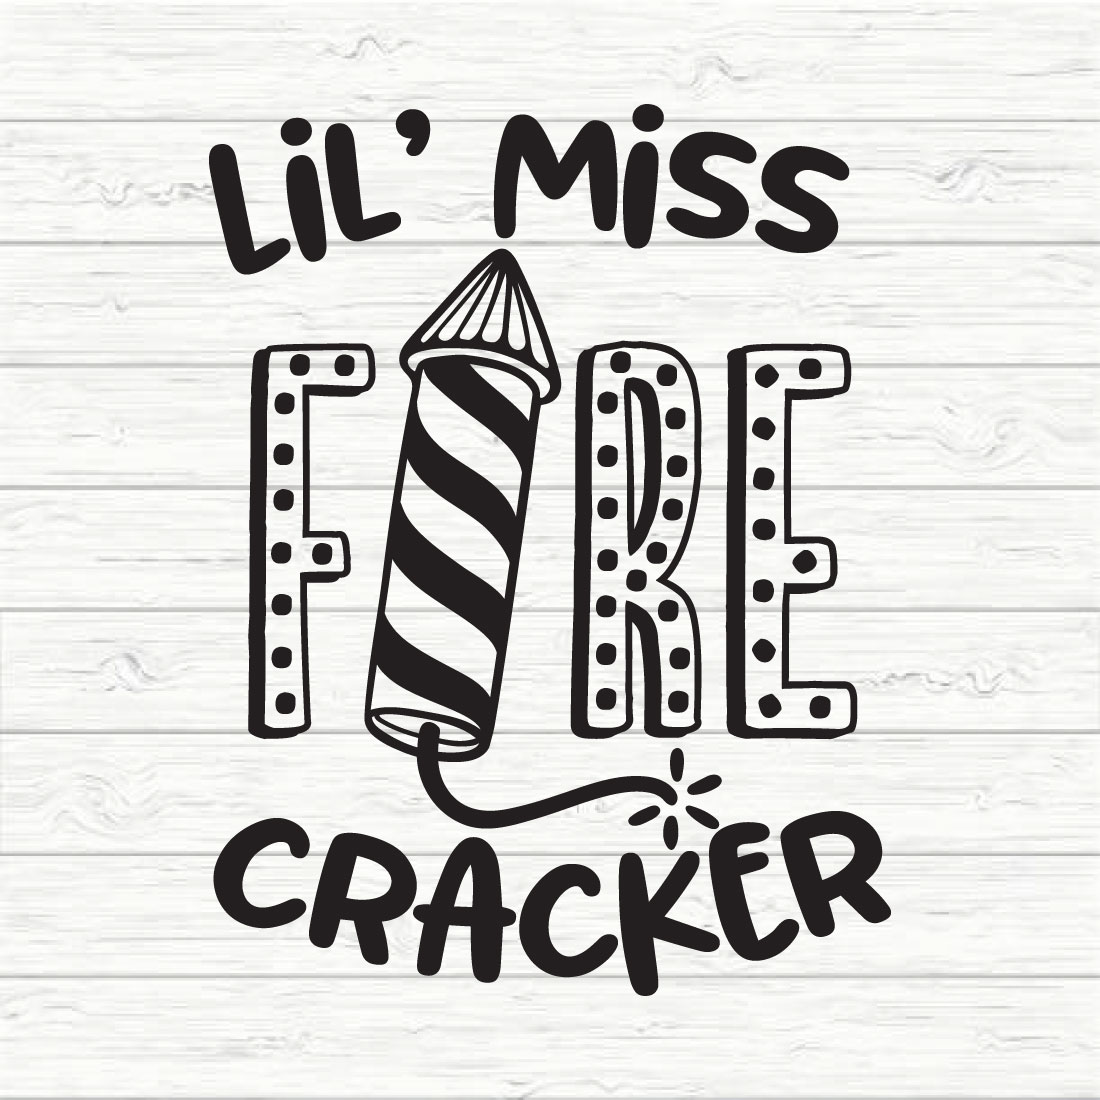 Lil Miss Fire cracker preview image.